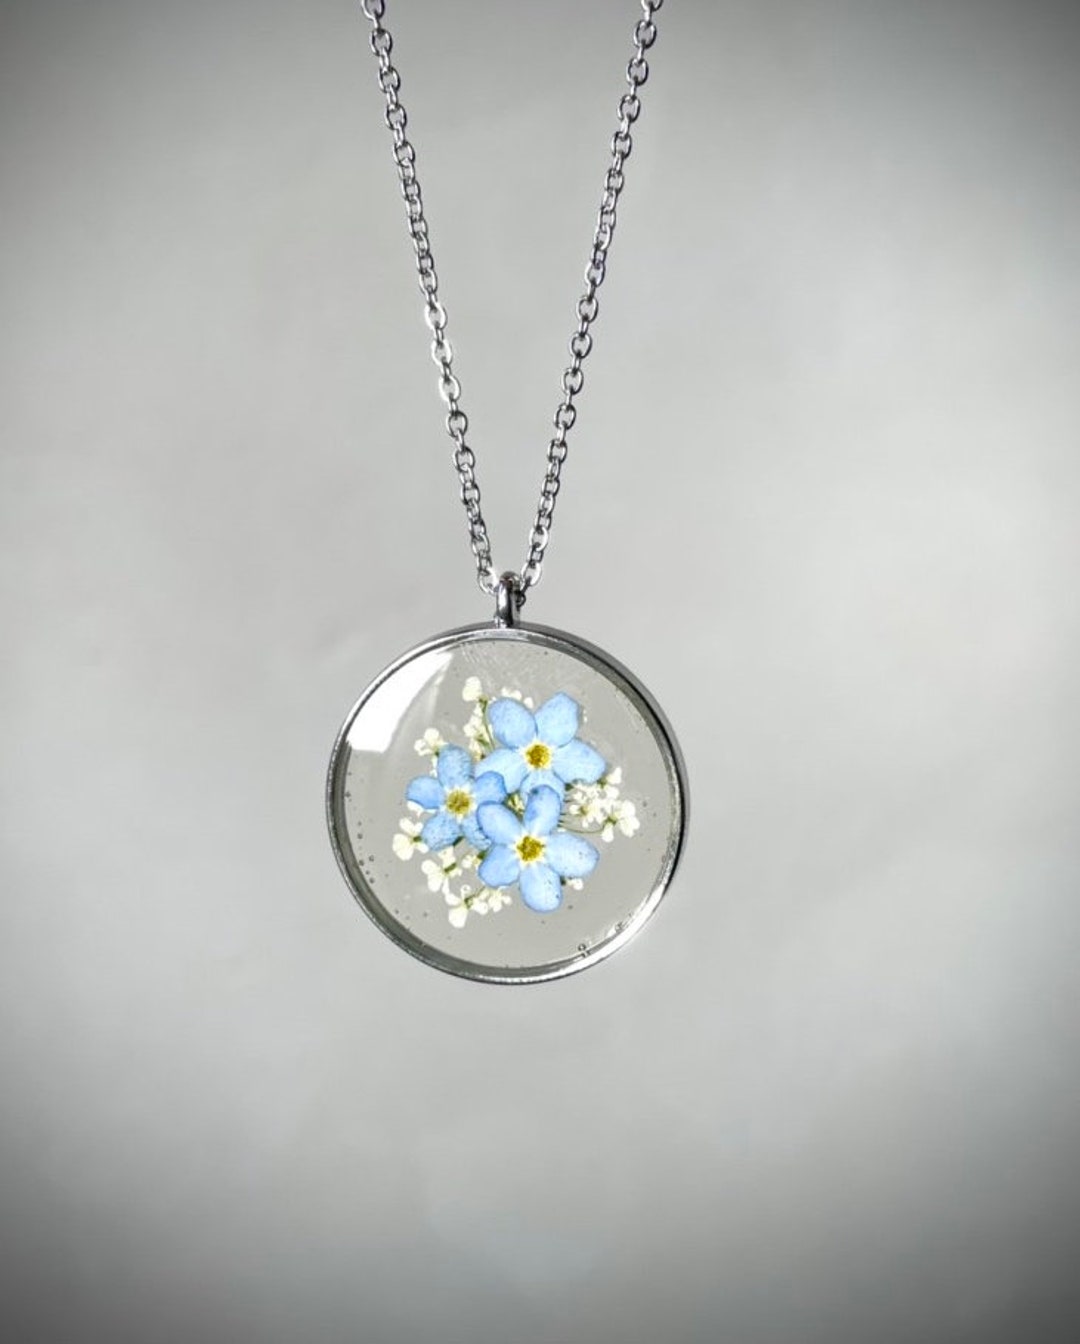 Forget me not Flower Necklace Resin Jewel With Myosotis   Etsy Canada